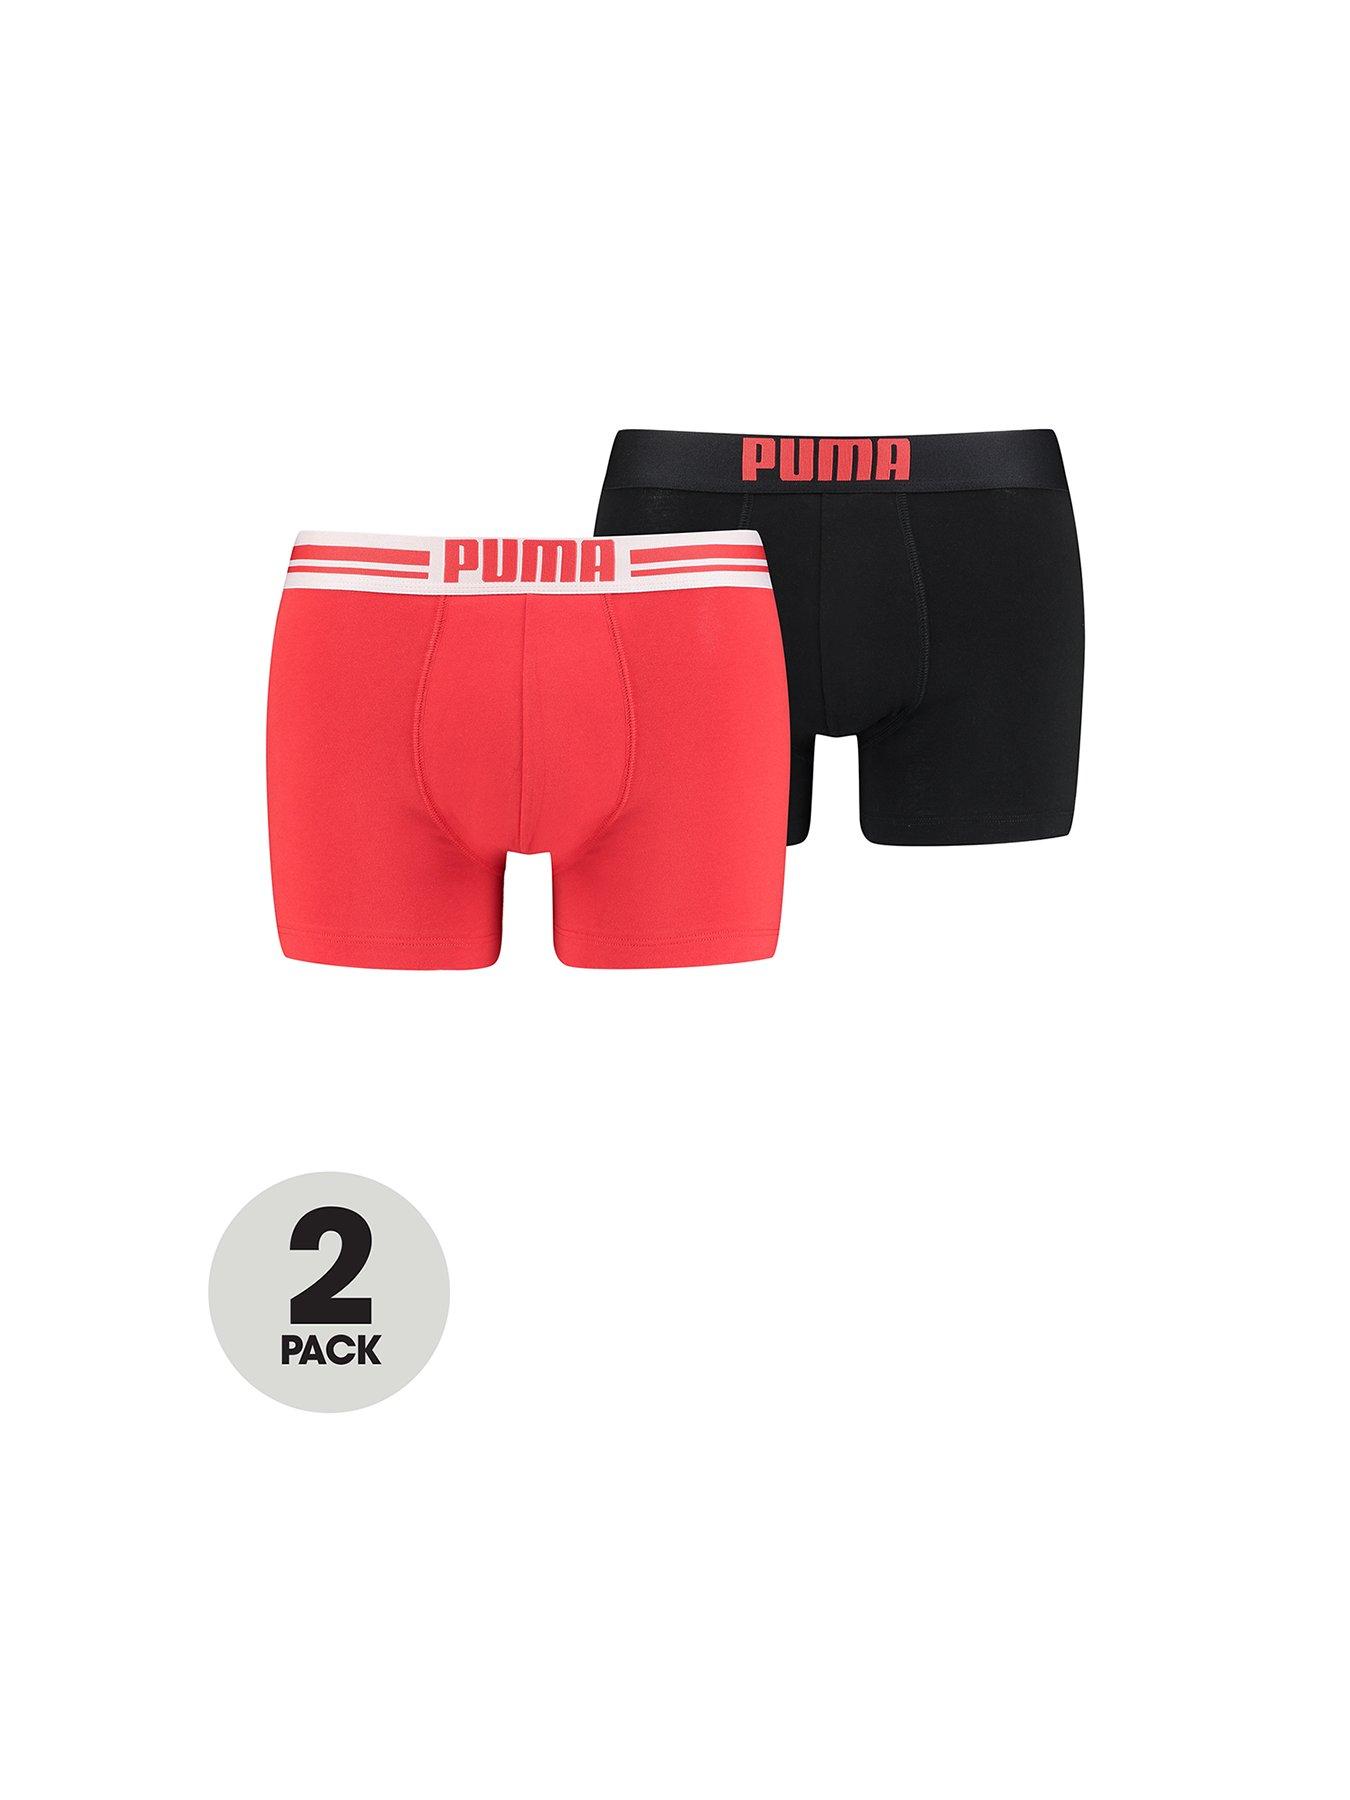 Puma 2 Pack of Logo Boxer Shorts - Red/Black | very.co.uk